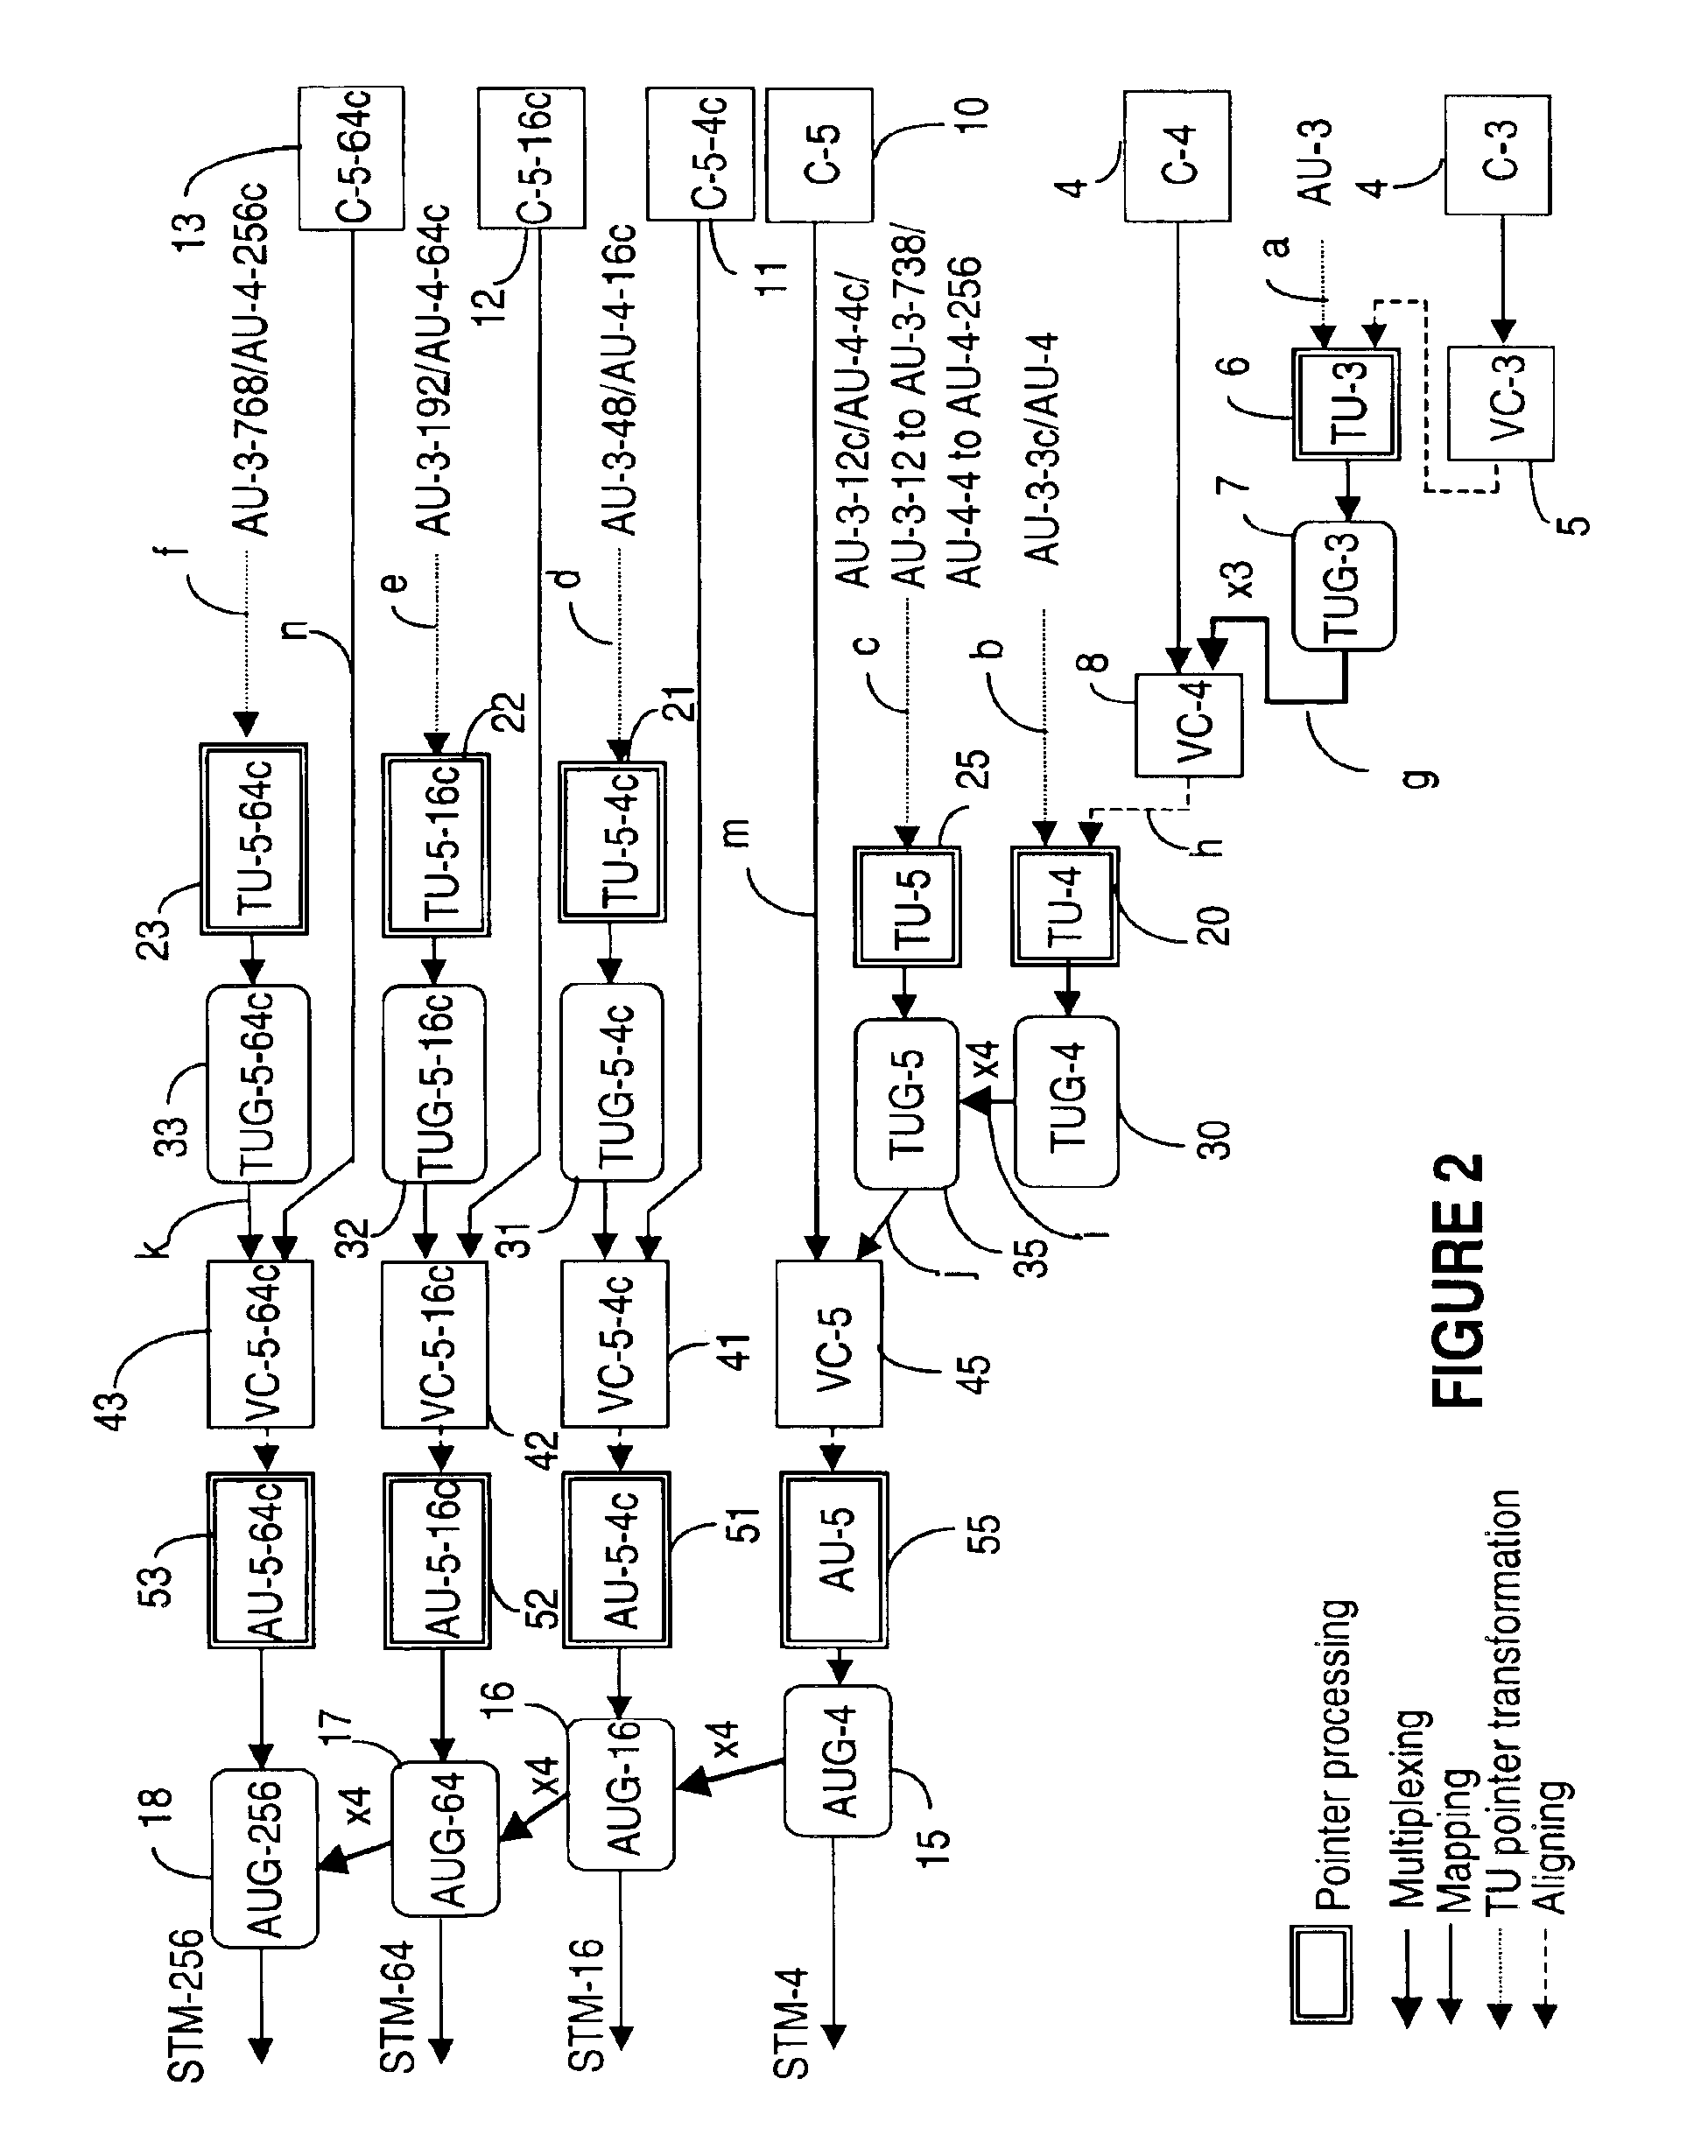 Multiplex hierarchy for high capacity transport systems